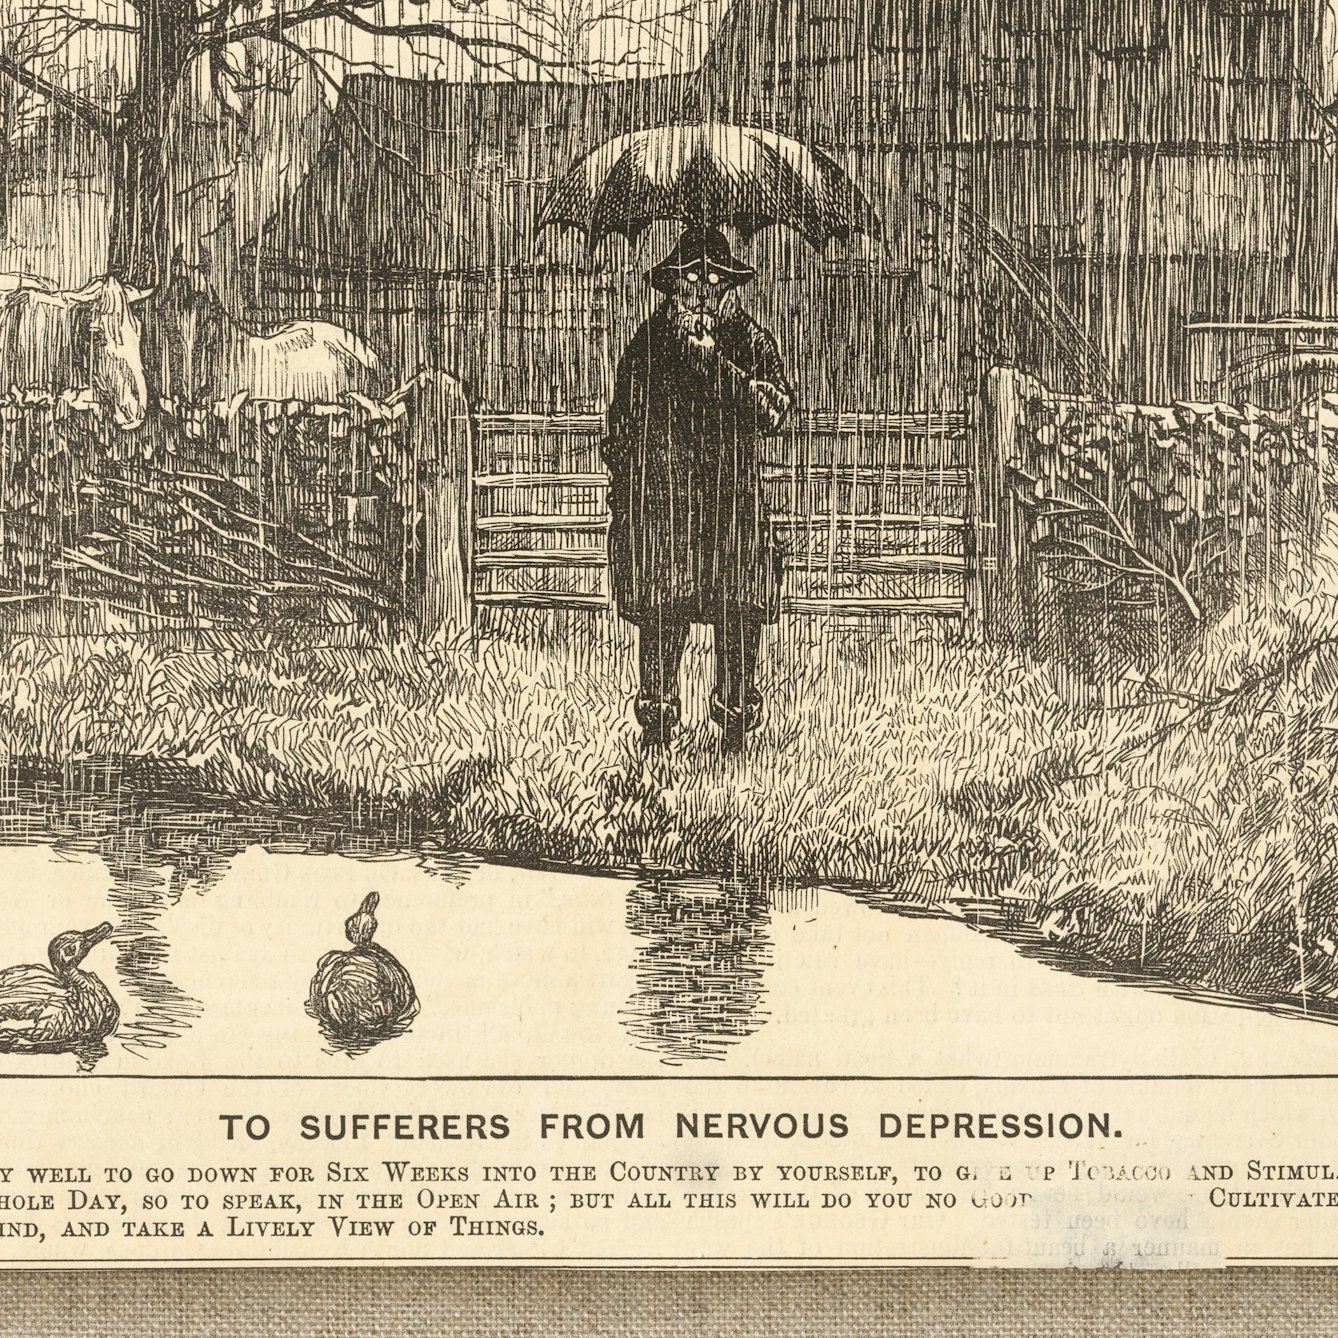 Photograph of a wood engraving from a 1869 newspaper, showing a depressive man holding an umbrella, standing by a country pond in the pouring rain. Beneath the engraving is the title, 'To sufferers from nervous depression'.